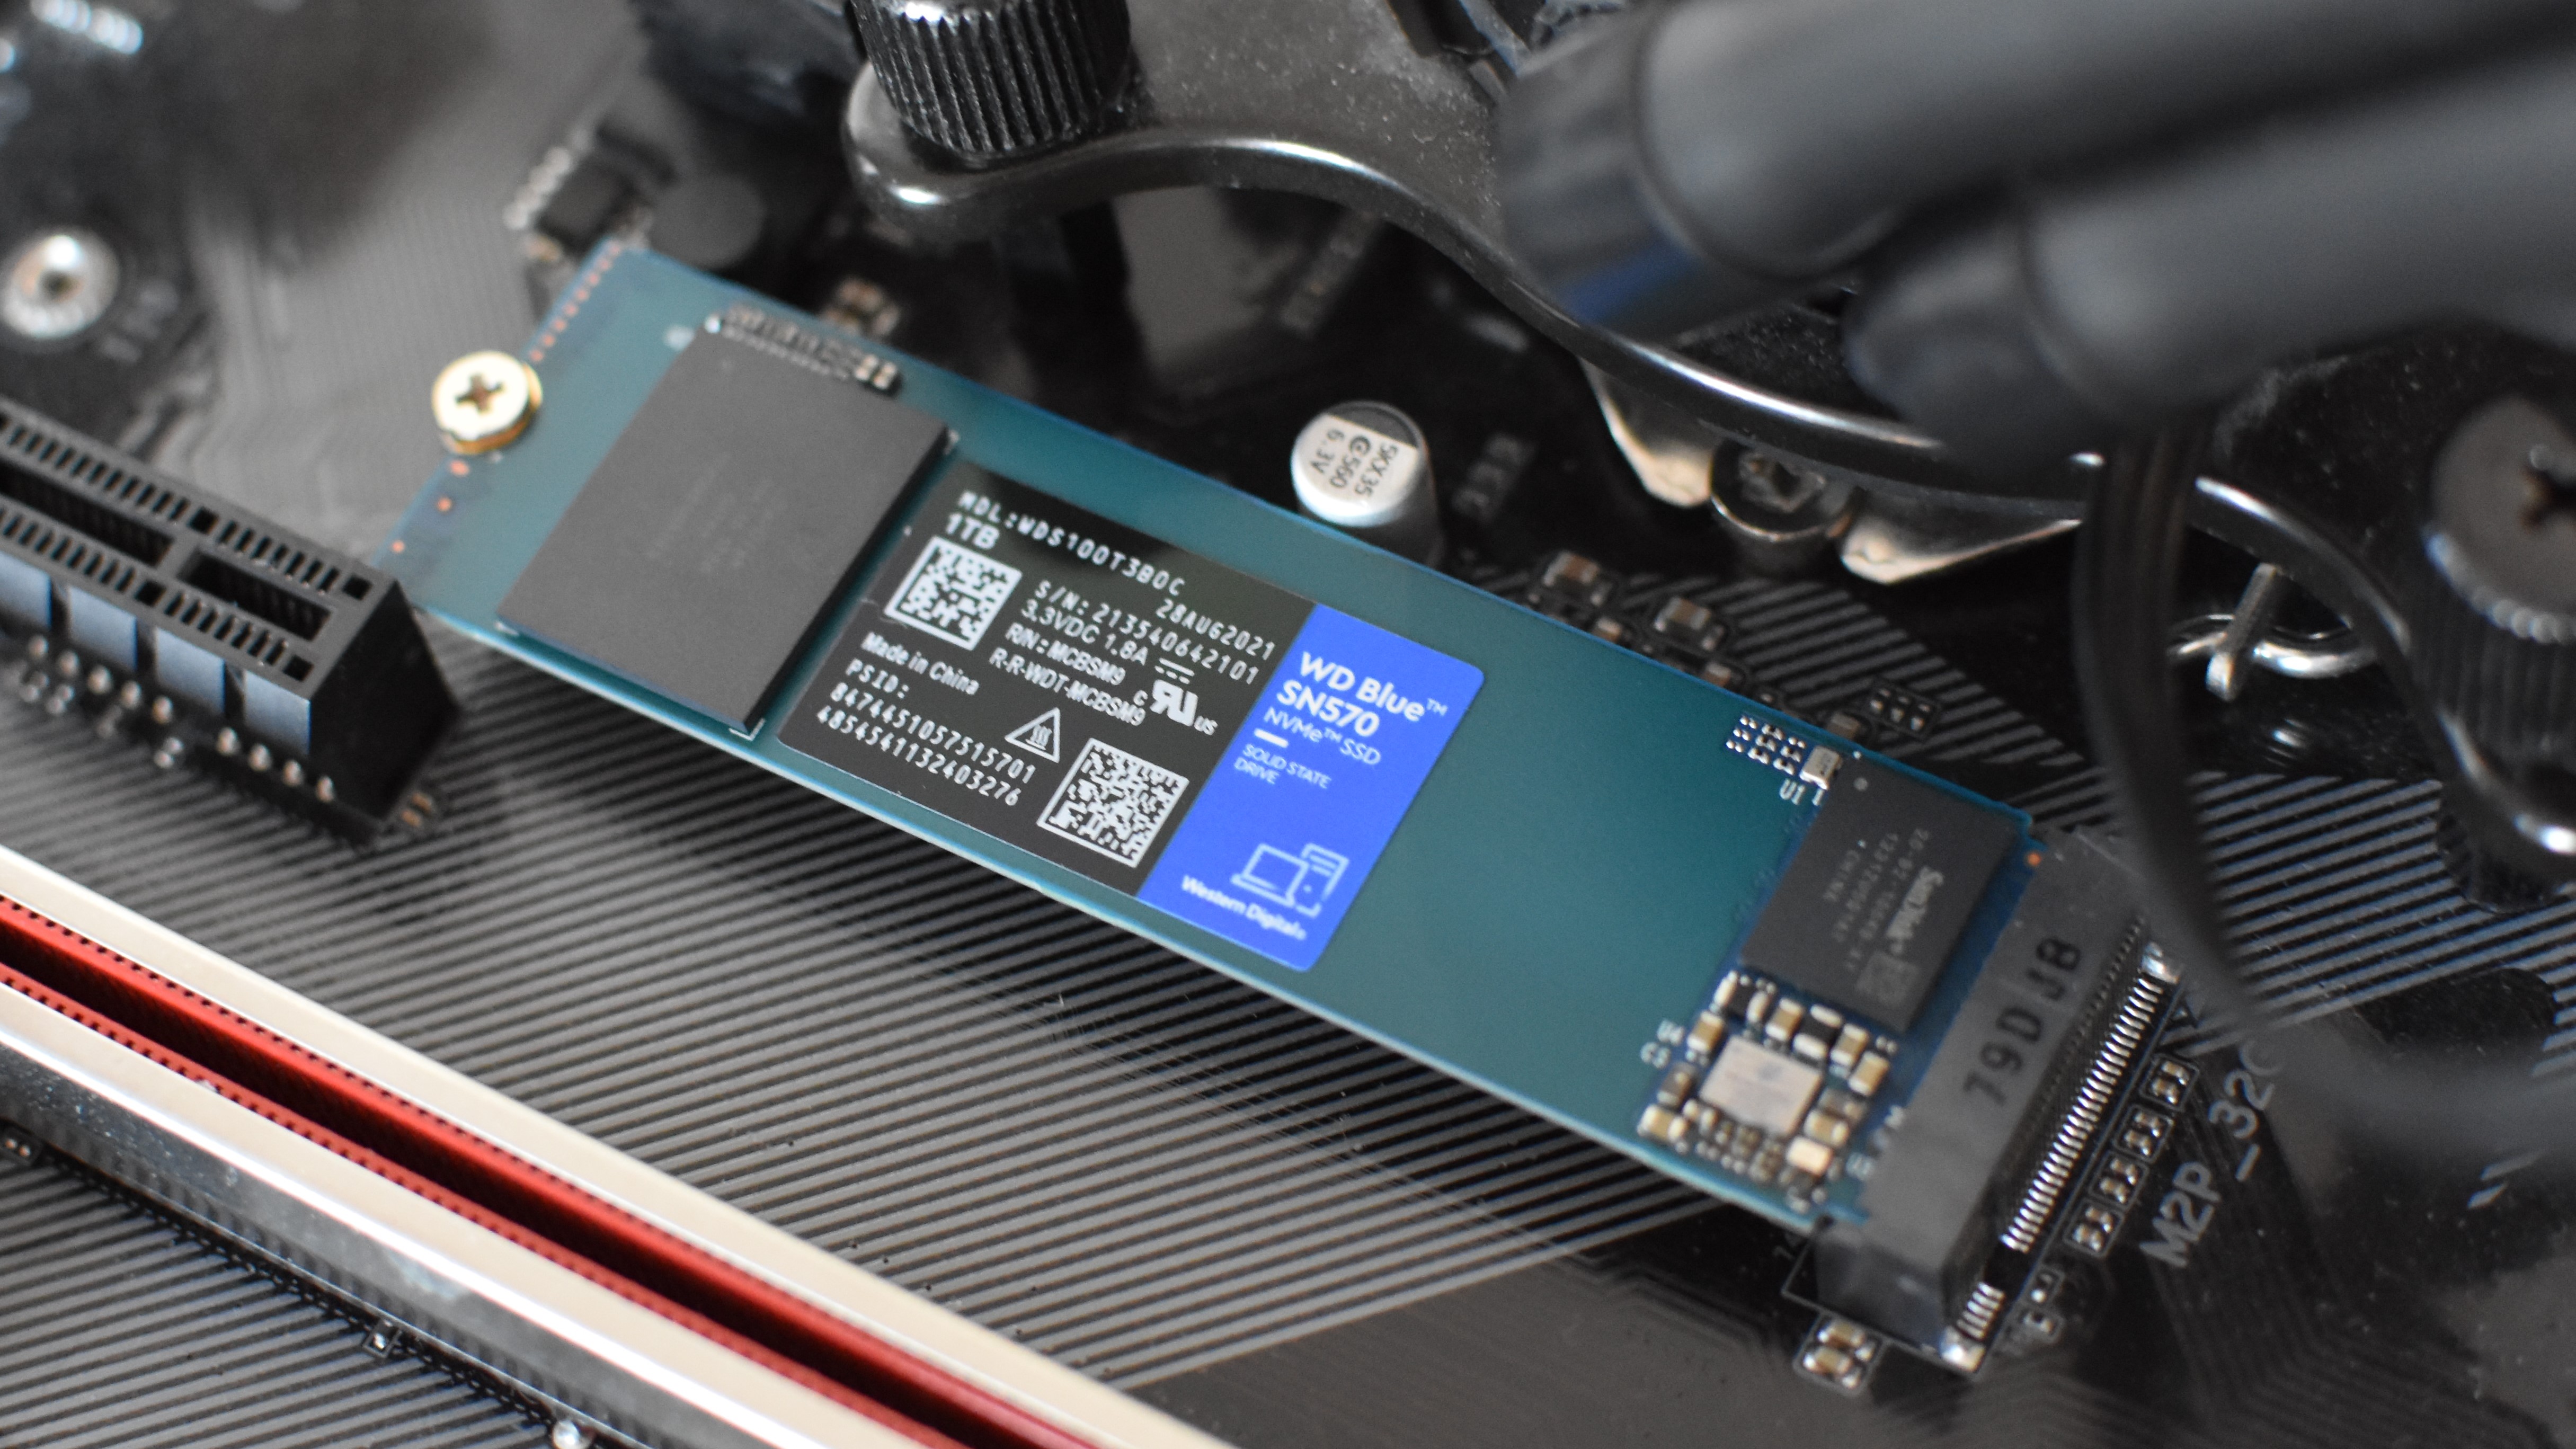 The WD Blue SN570 SSD installed in an M.2 slot.